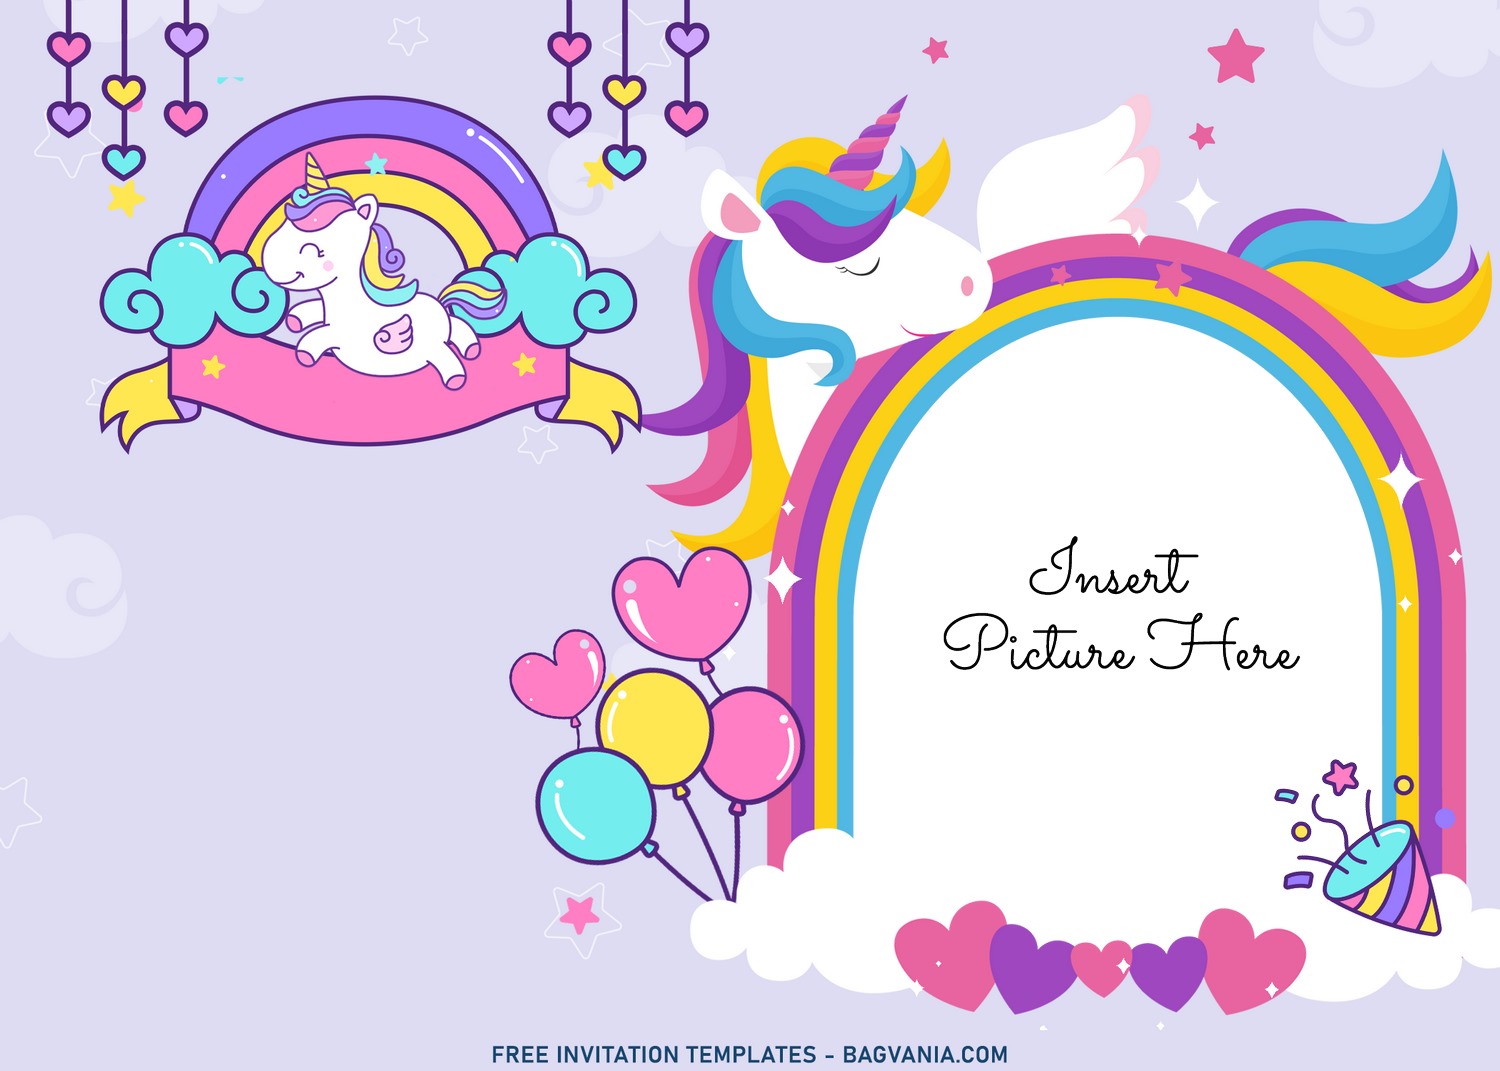 11+ Magical Unicorn Birthday Invitation Templates With Colorful Pastel